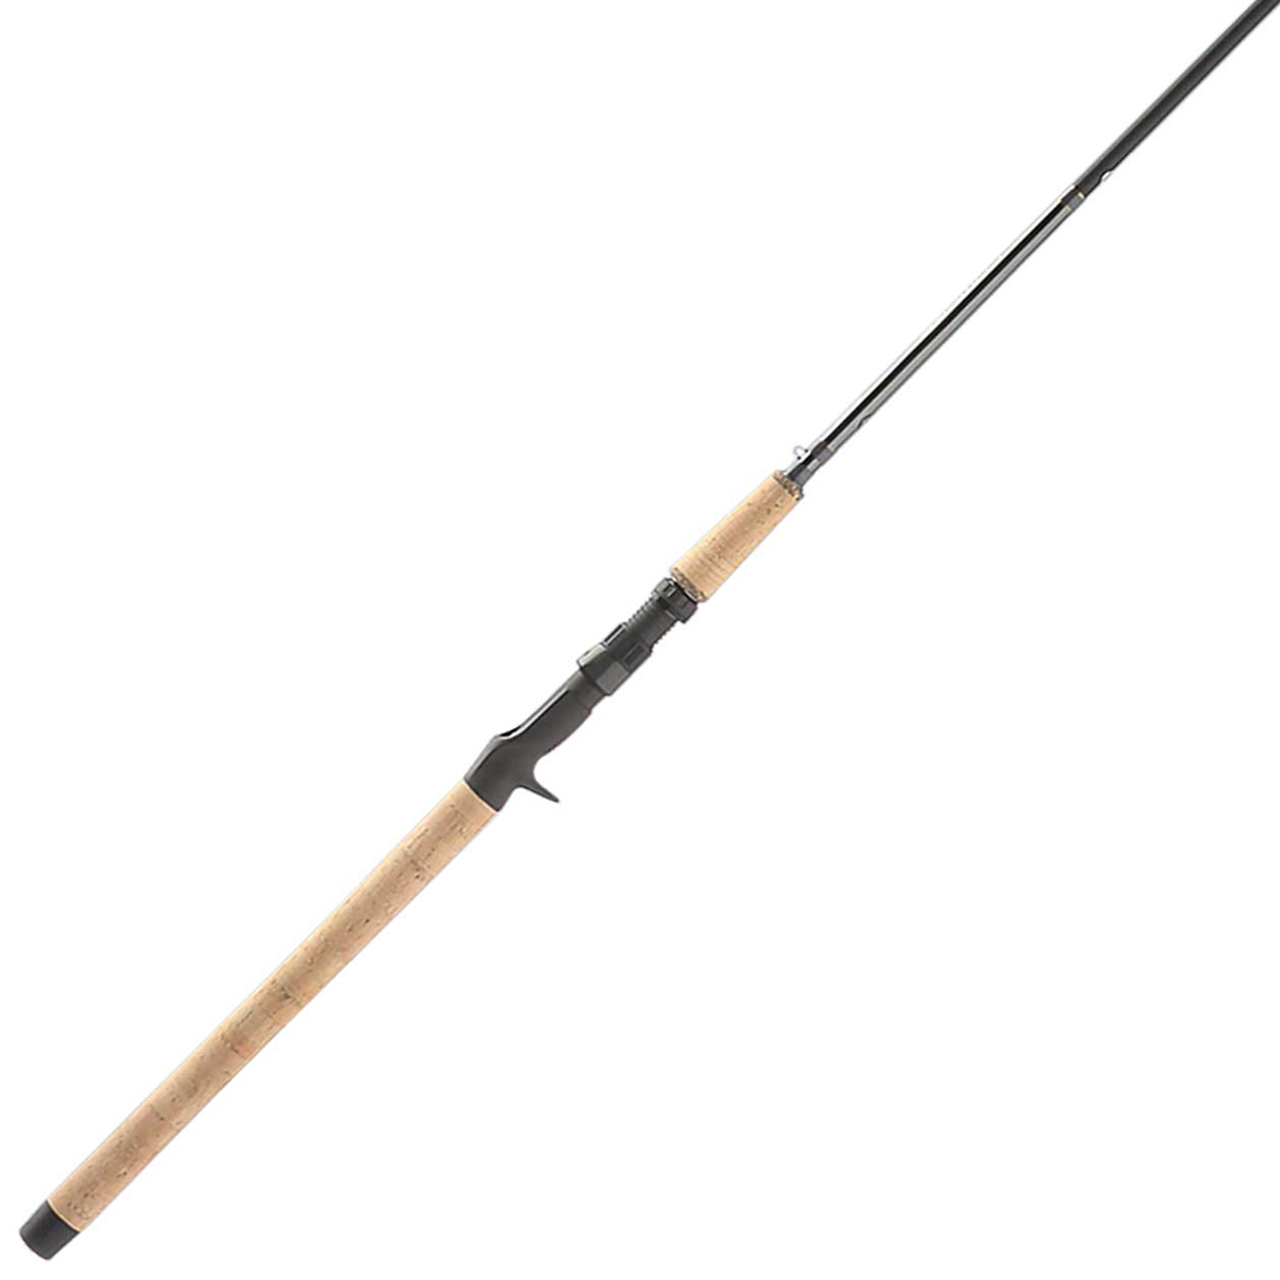  WEIMIAO Fishing Rod Solid Tips Casting/Spinning